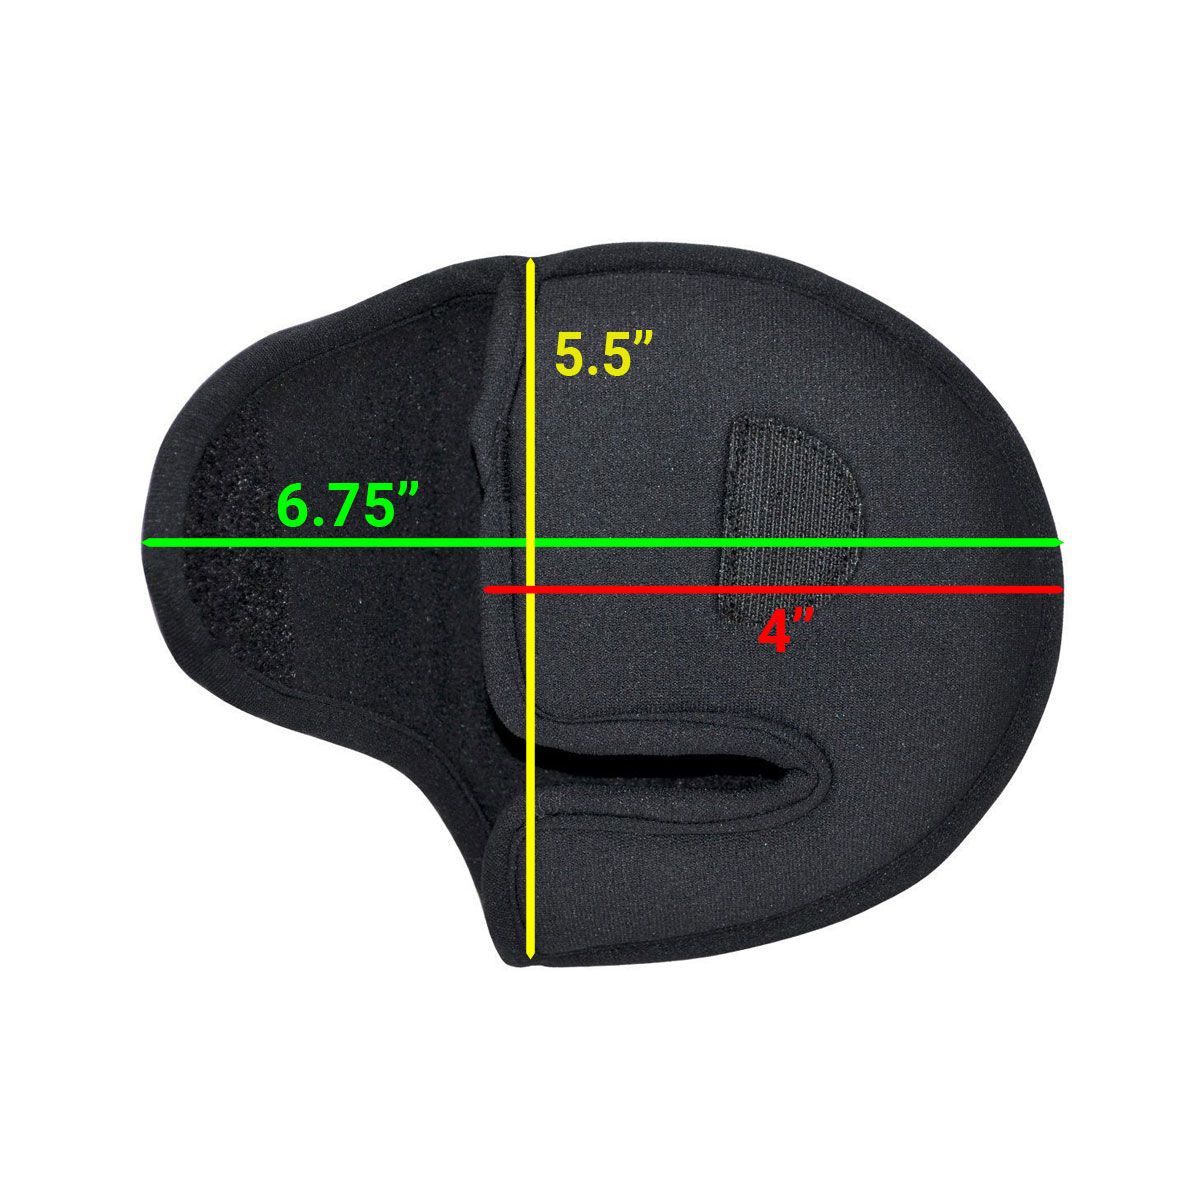 dimensions of the Intech Golf Neoprene Mallet Putter Cover